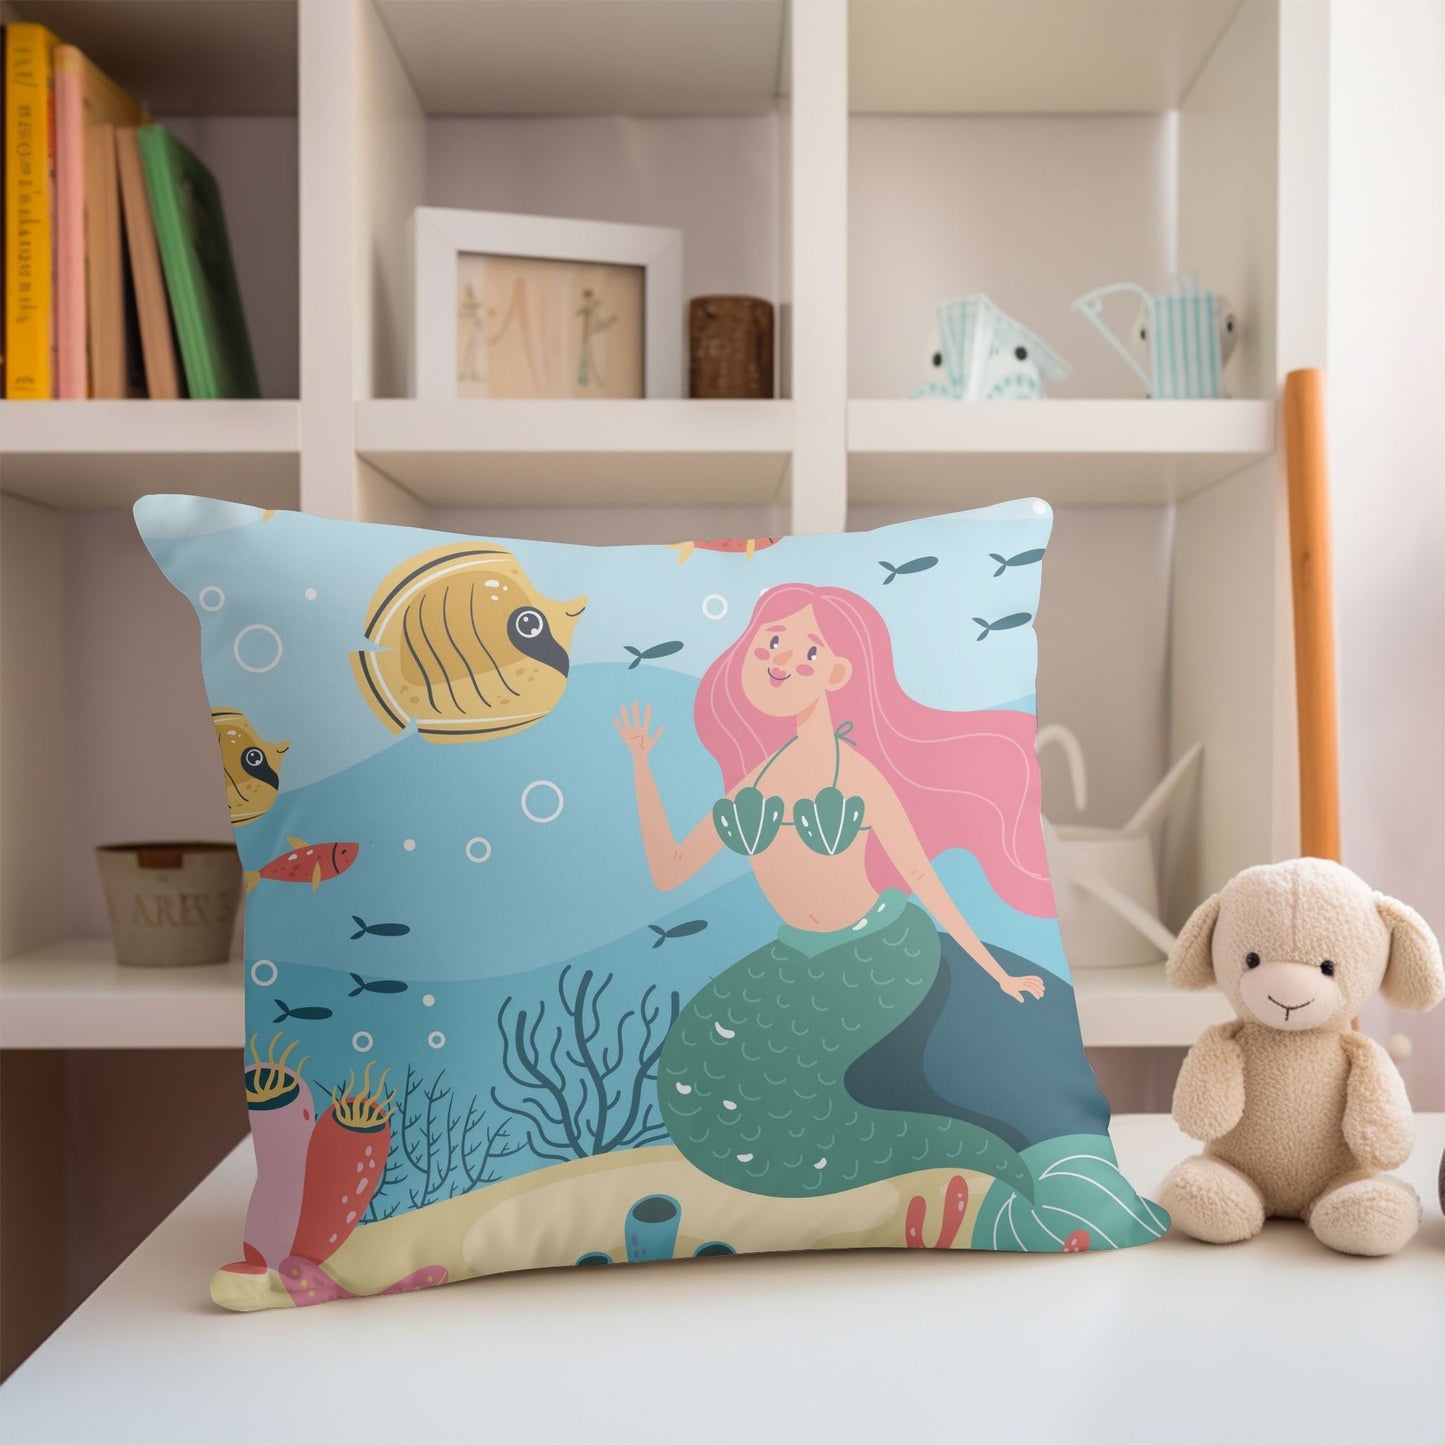 Girls pillow with mermaid print for a magical touch.